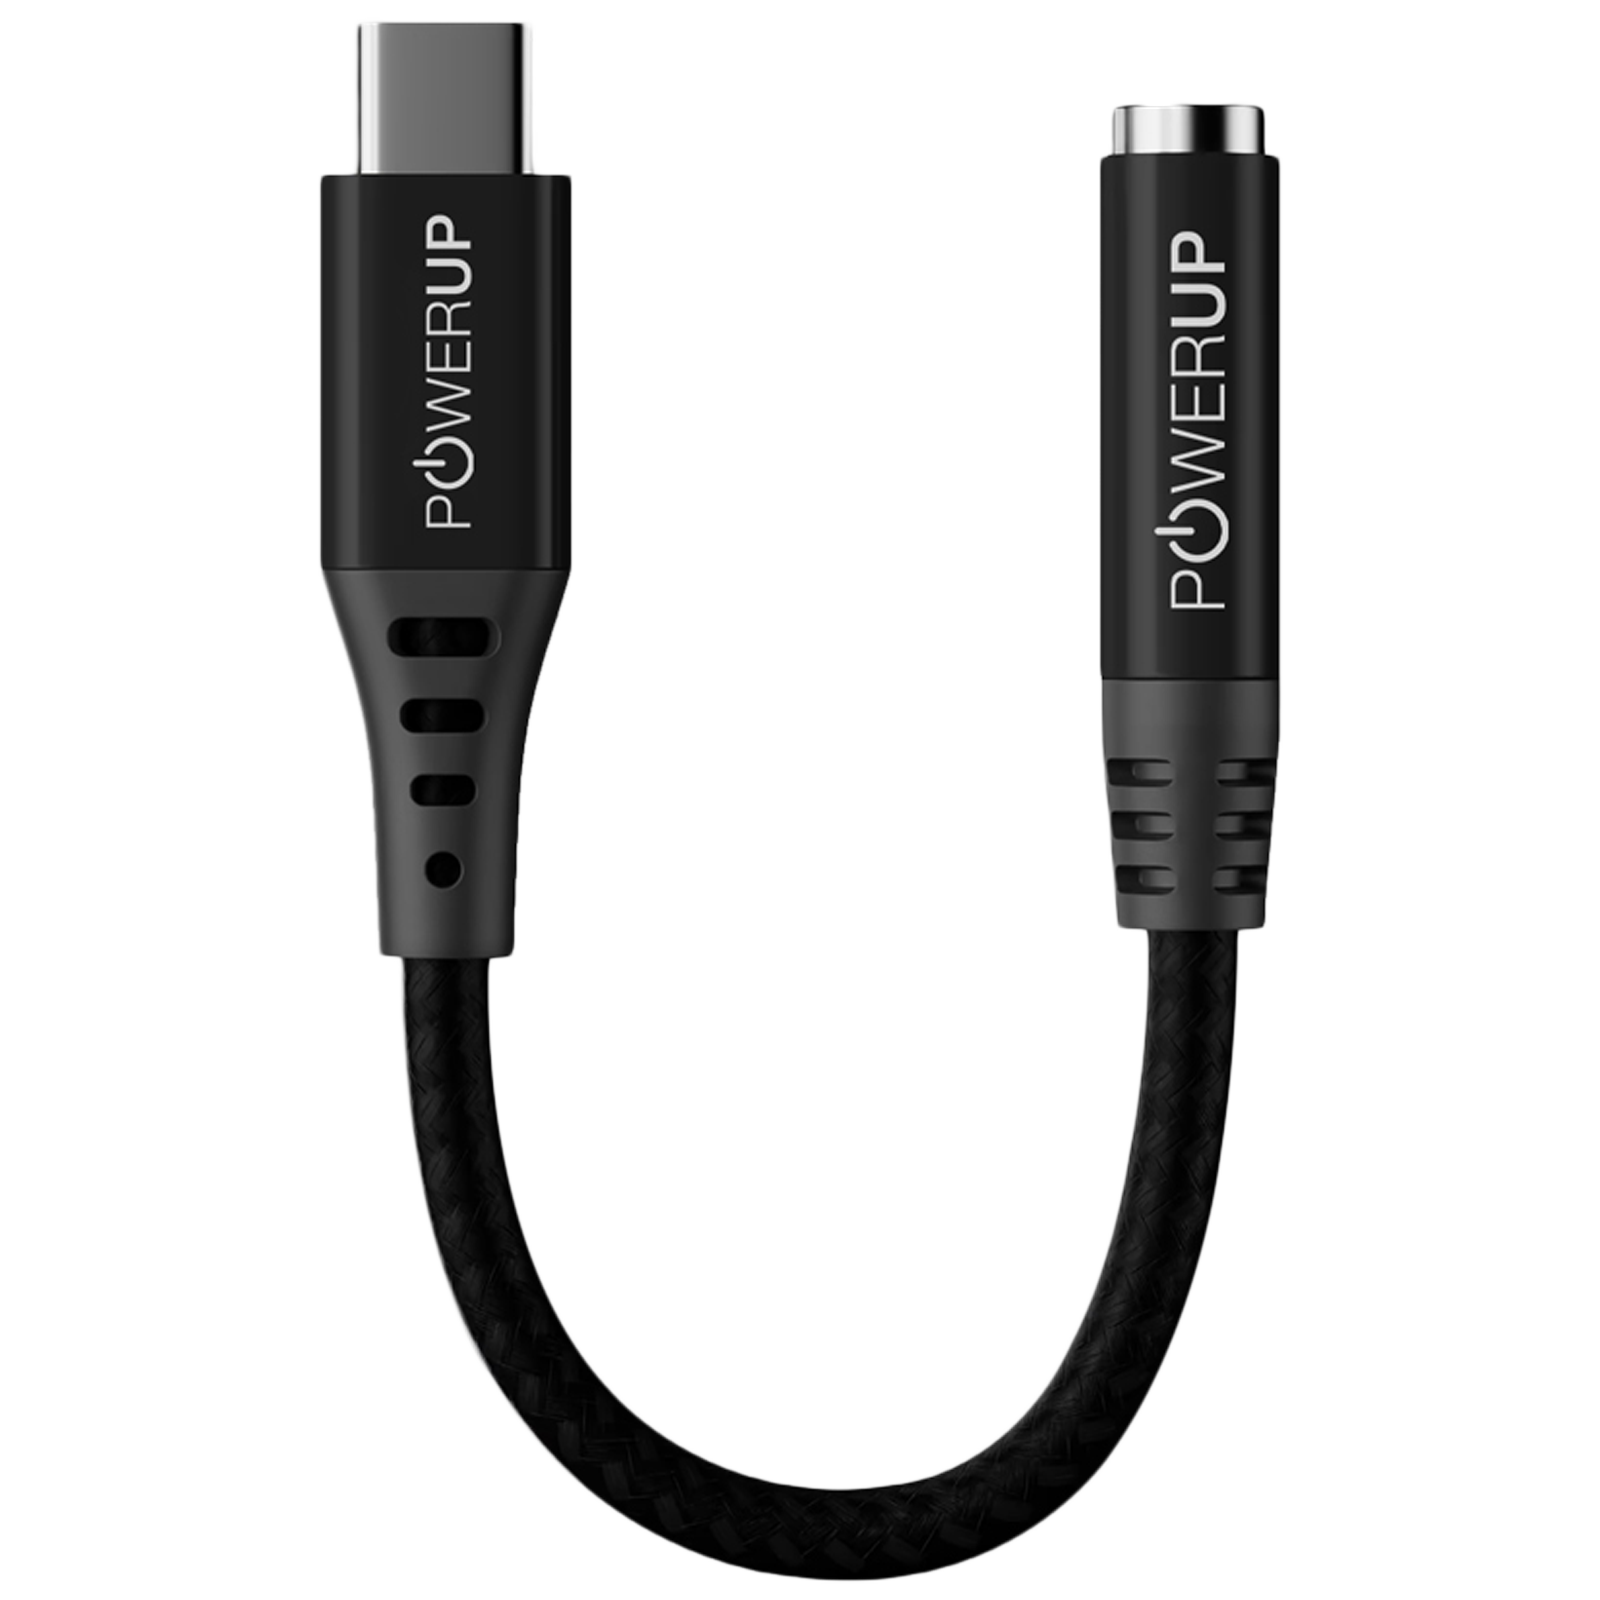 PowerUp 0.12 Meter USB 3.0 Type-C to 3.5mm Stereo Audio Aux Cable (PUP-TCTA-12BK, Black)